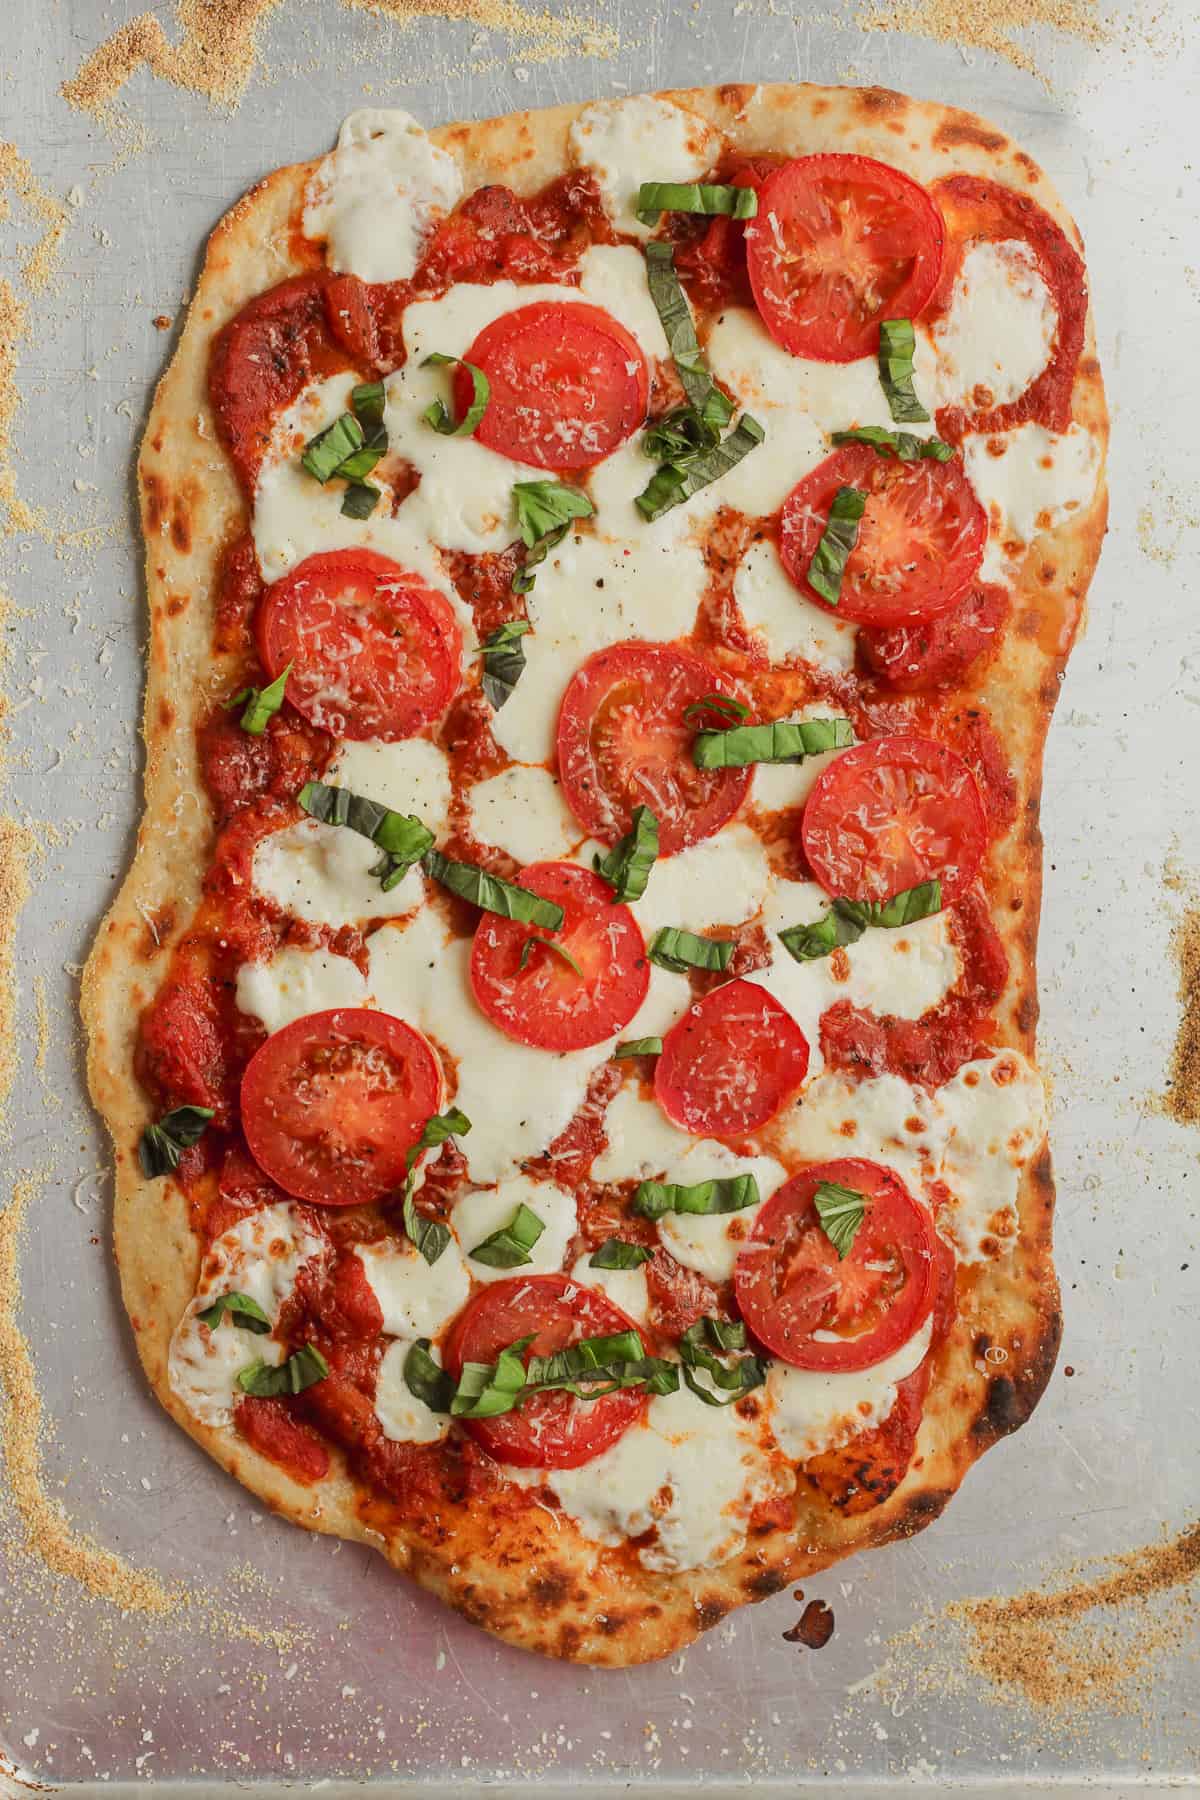 A pan of just baked flatbread pizza.